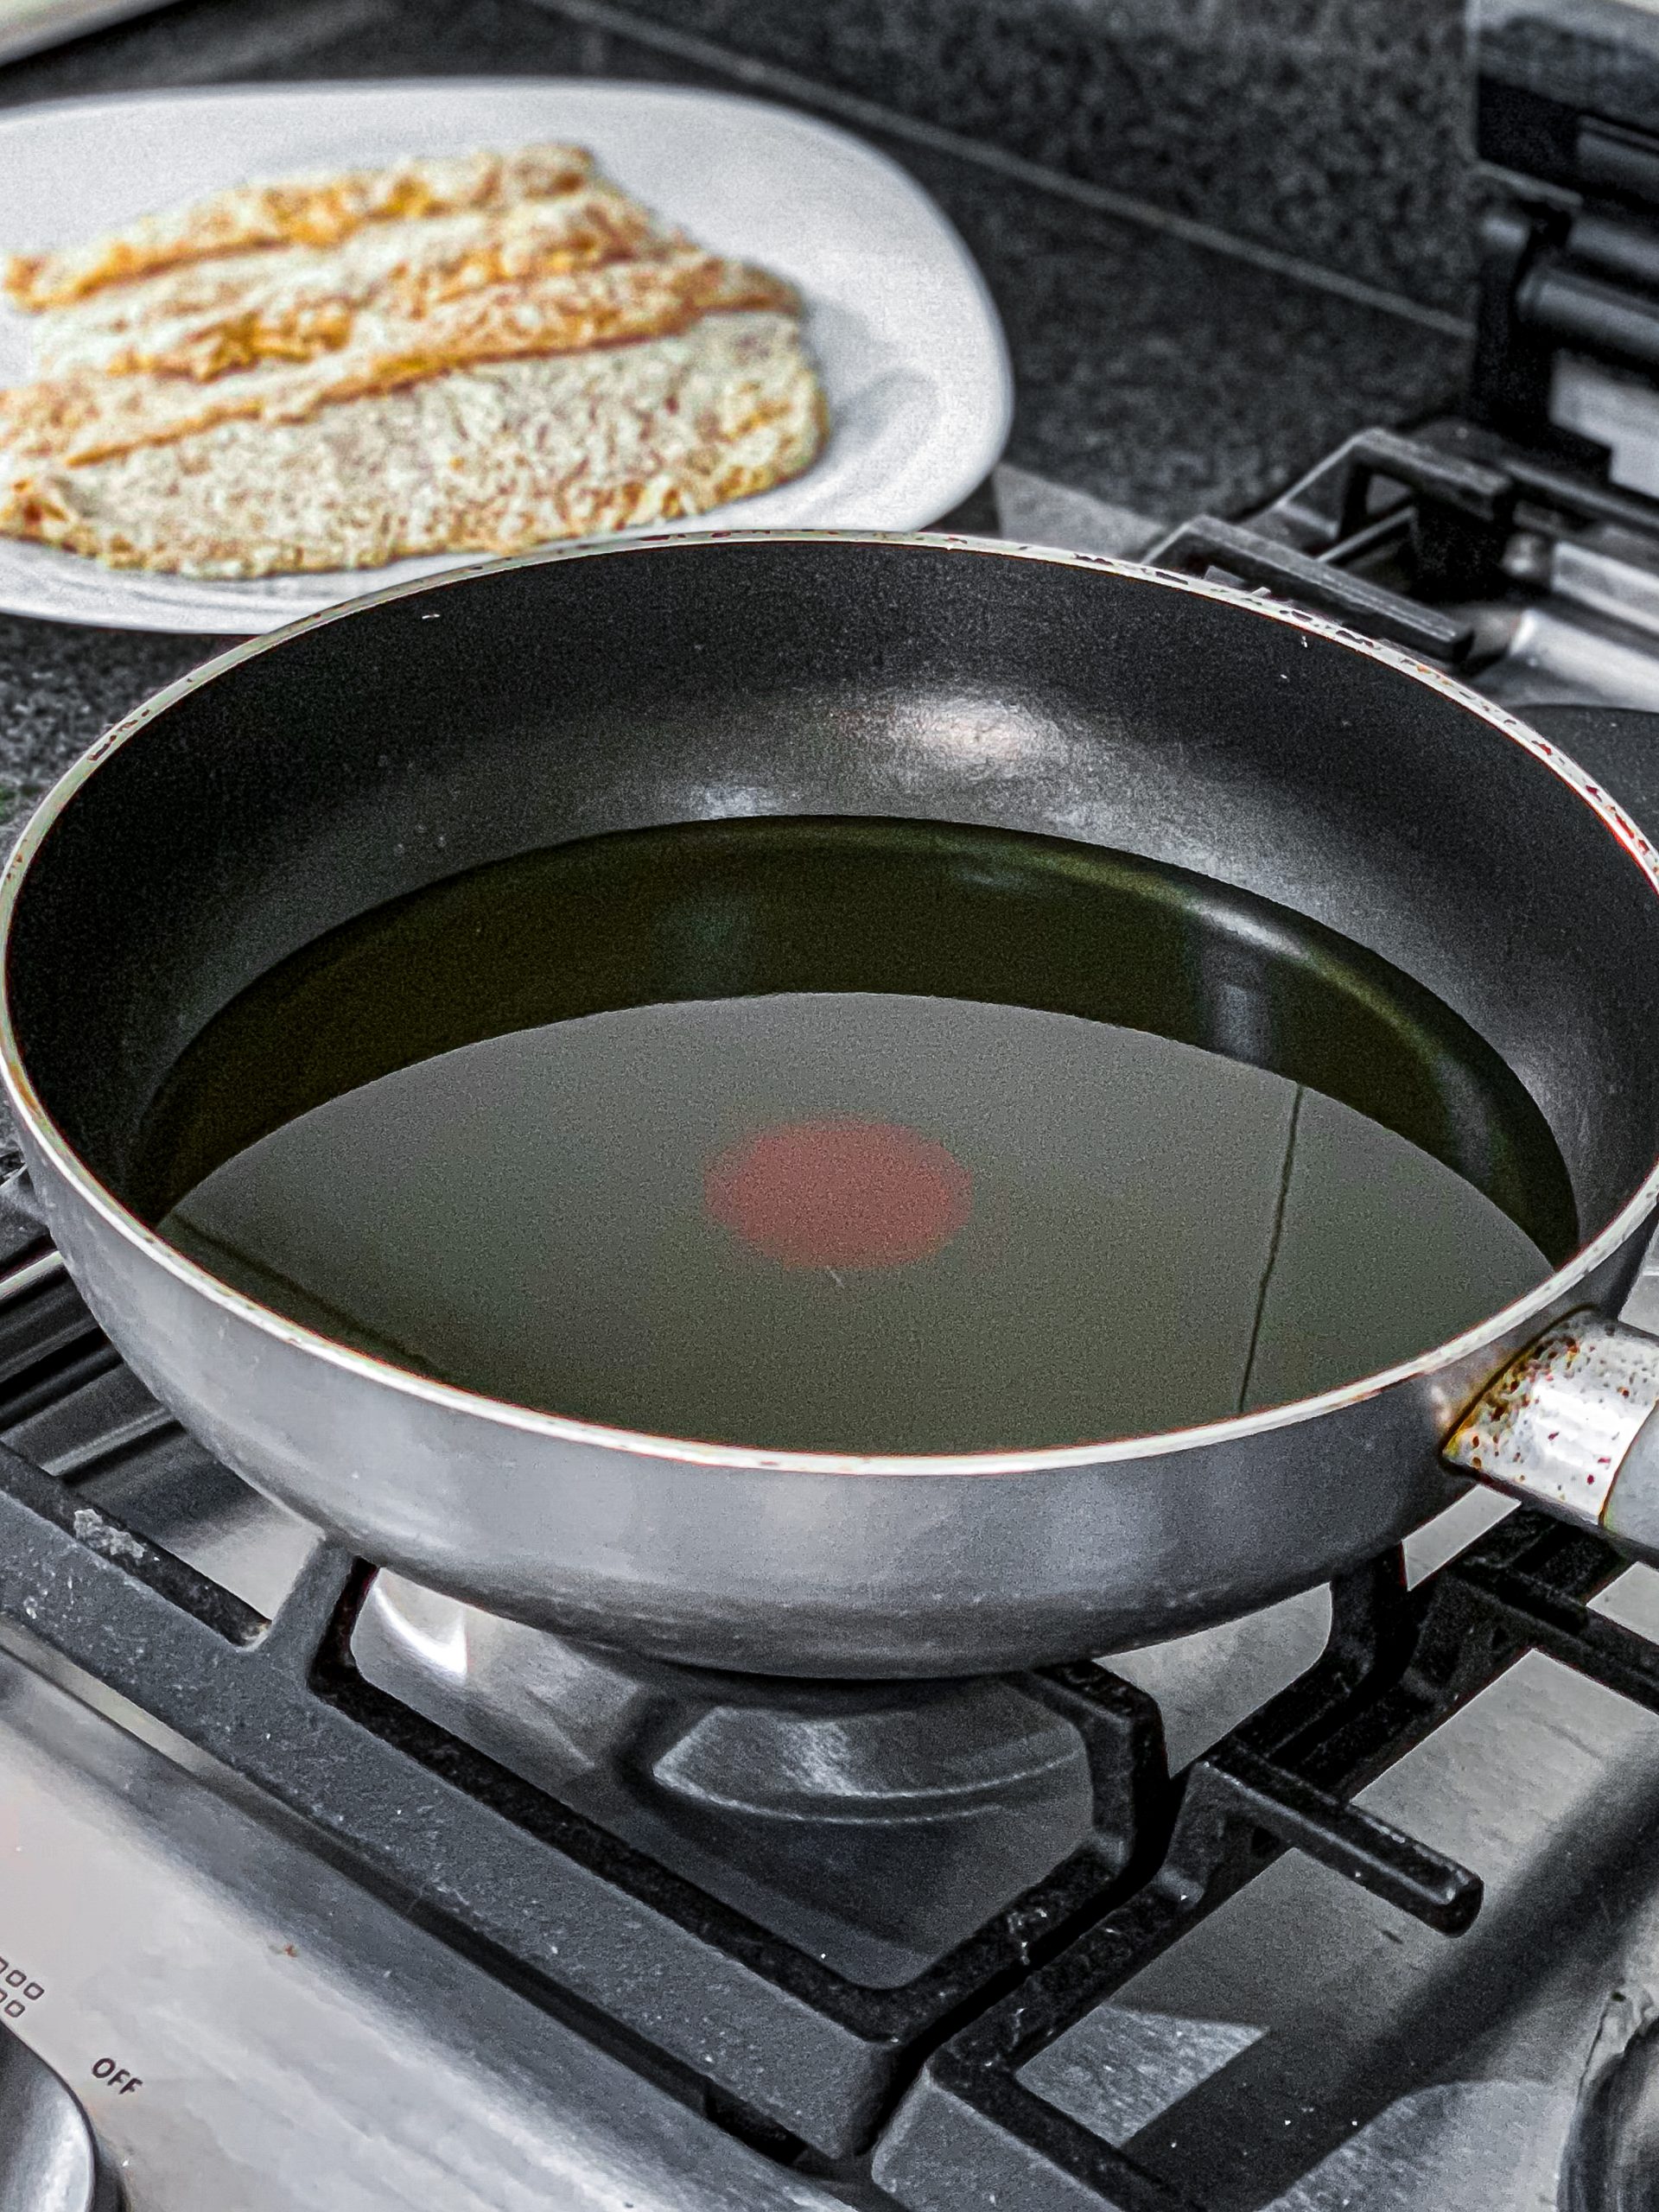 In a large skillet add oil and heat to medium-low.